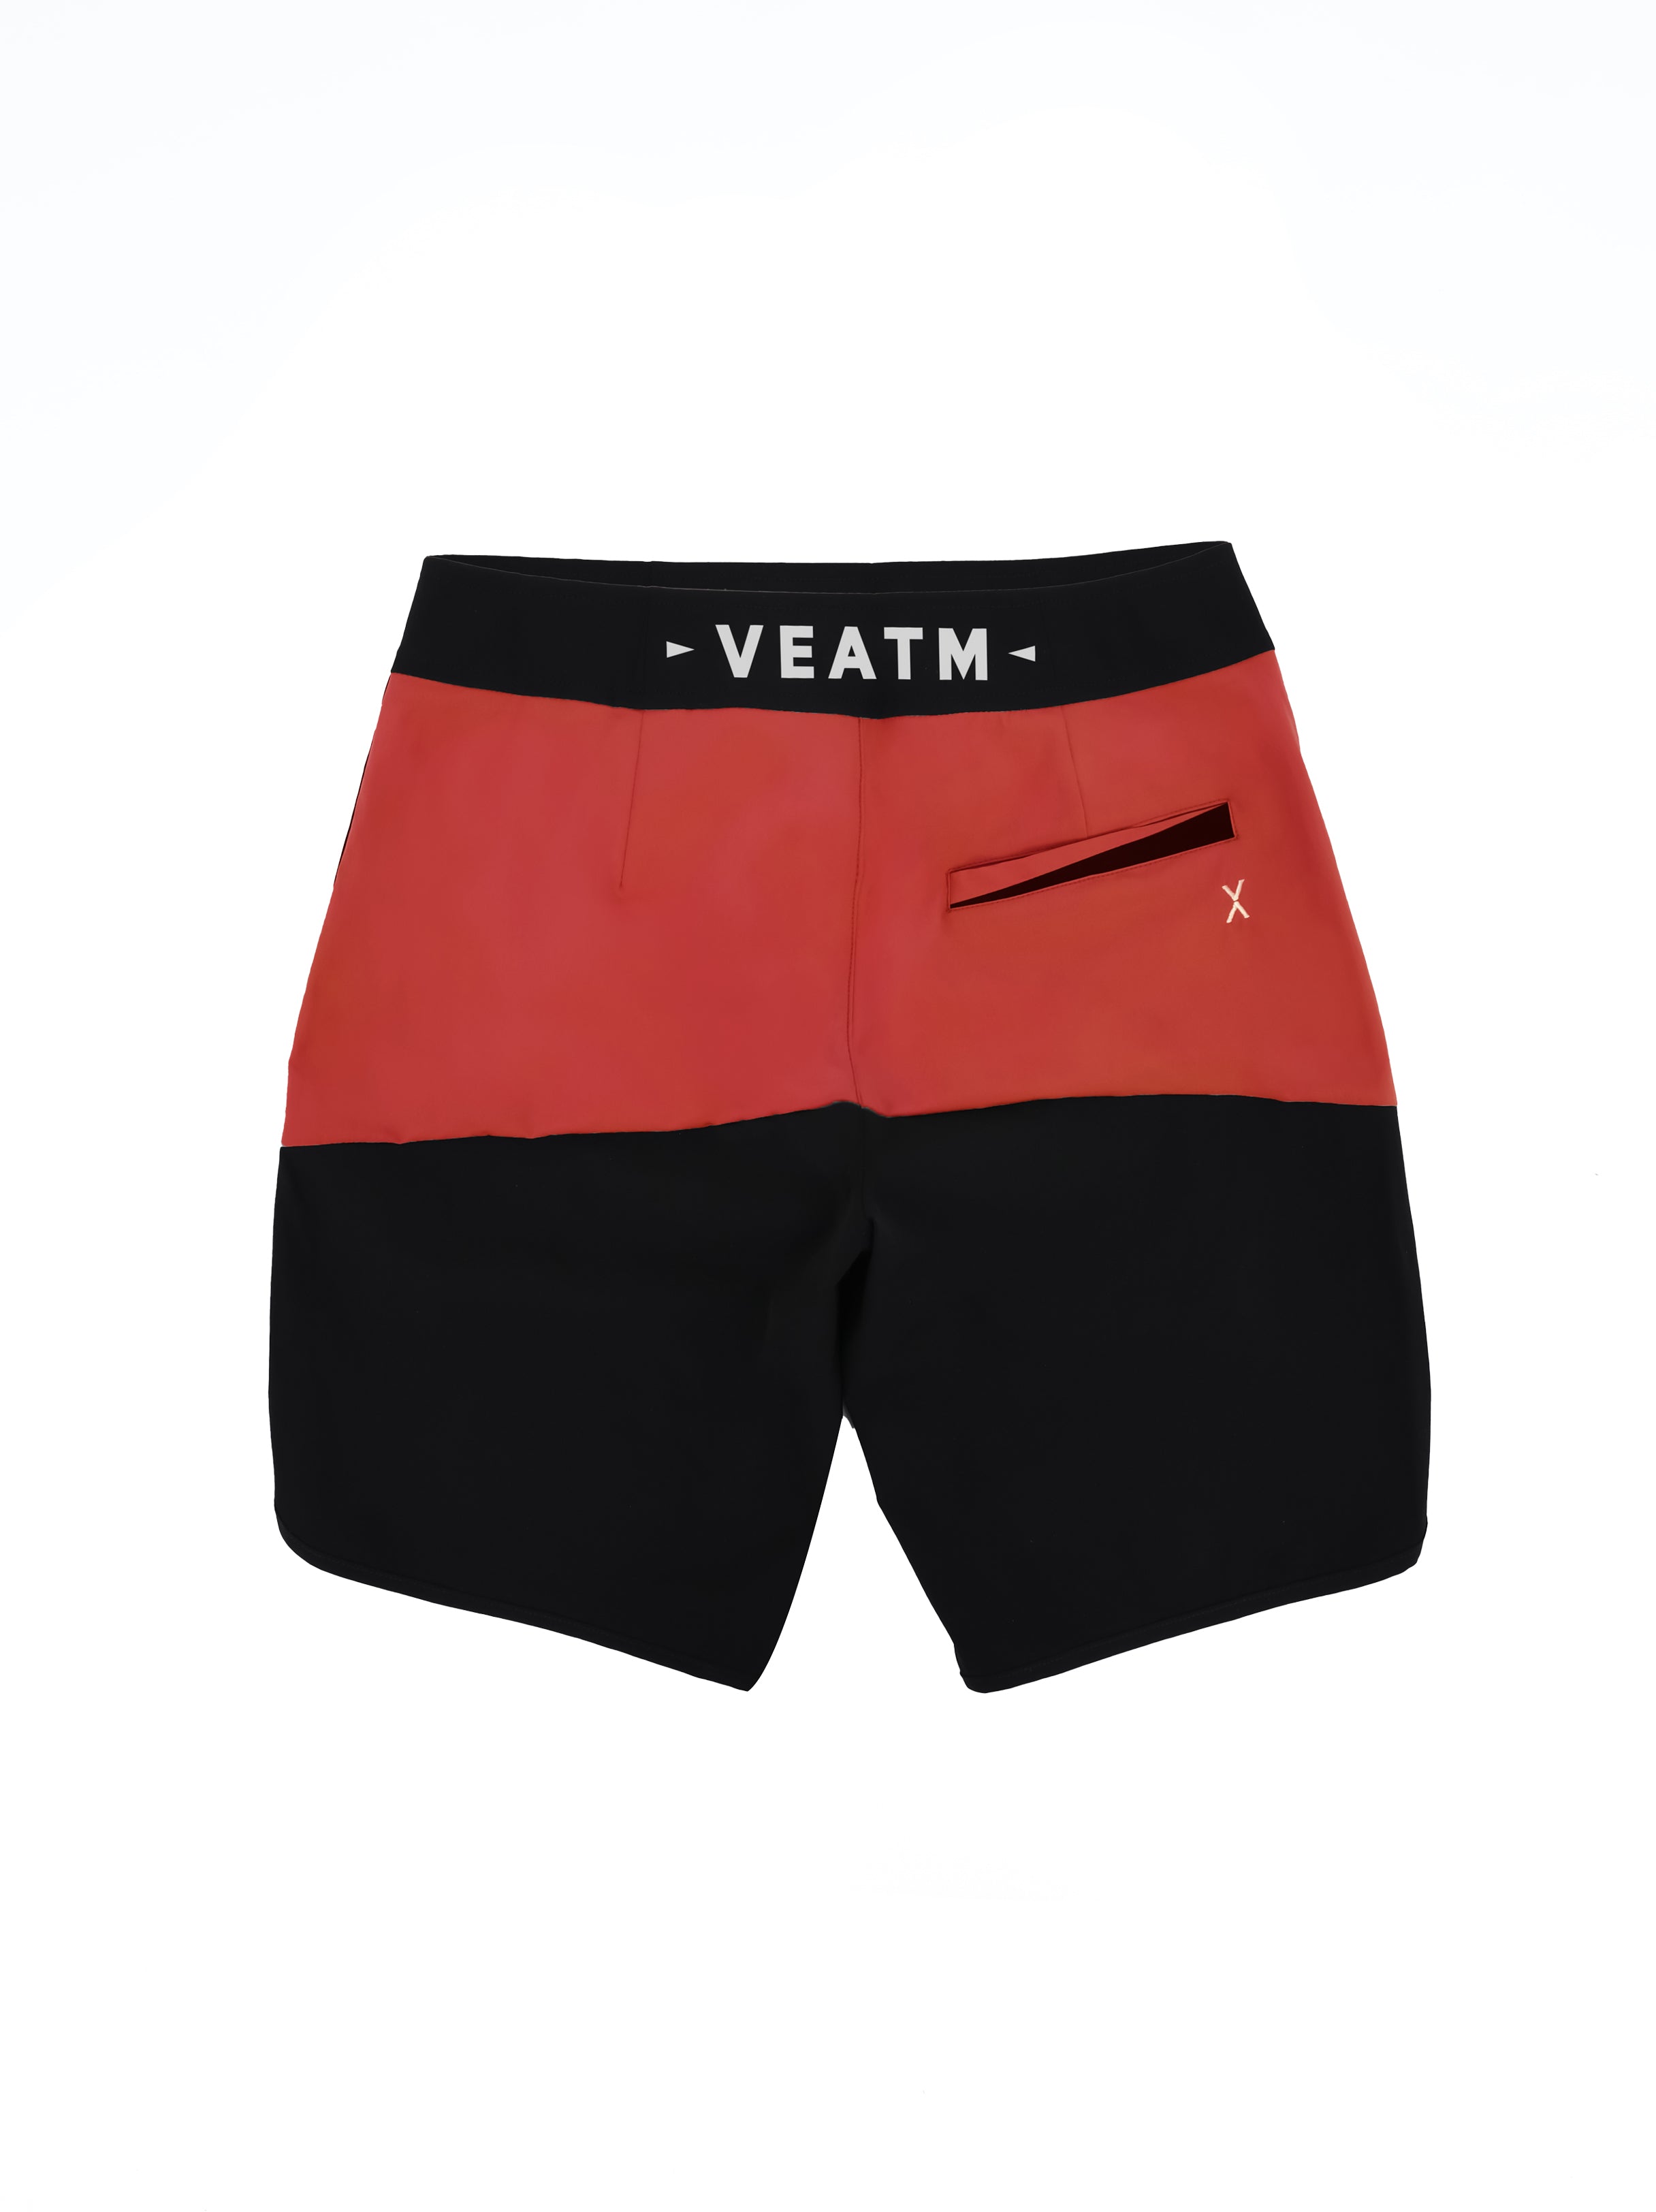 BICOLOR SURF SHORTS【RED】